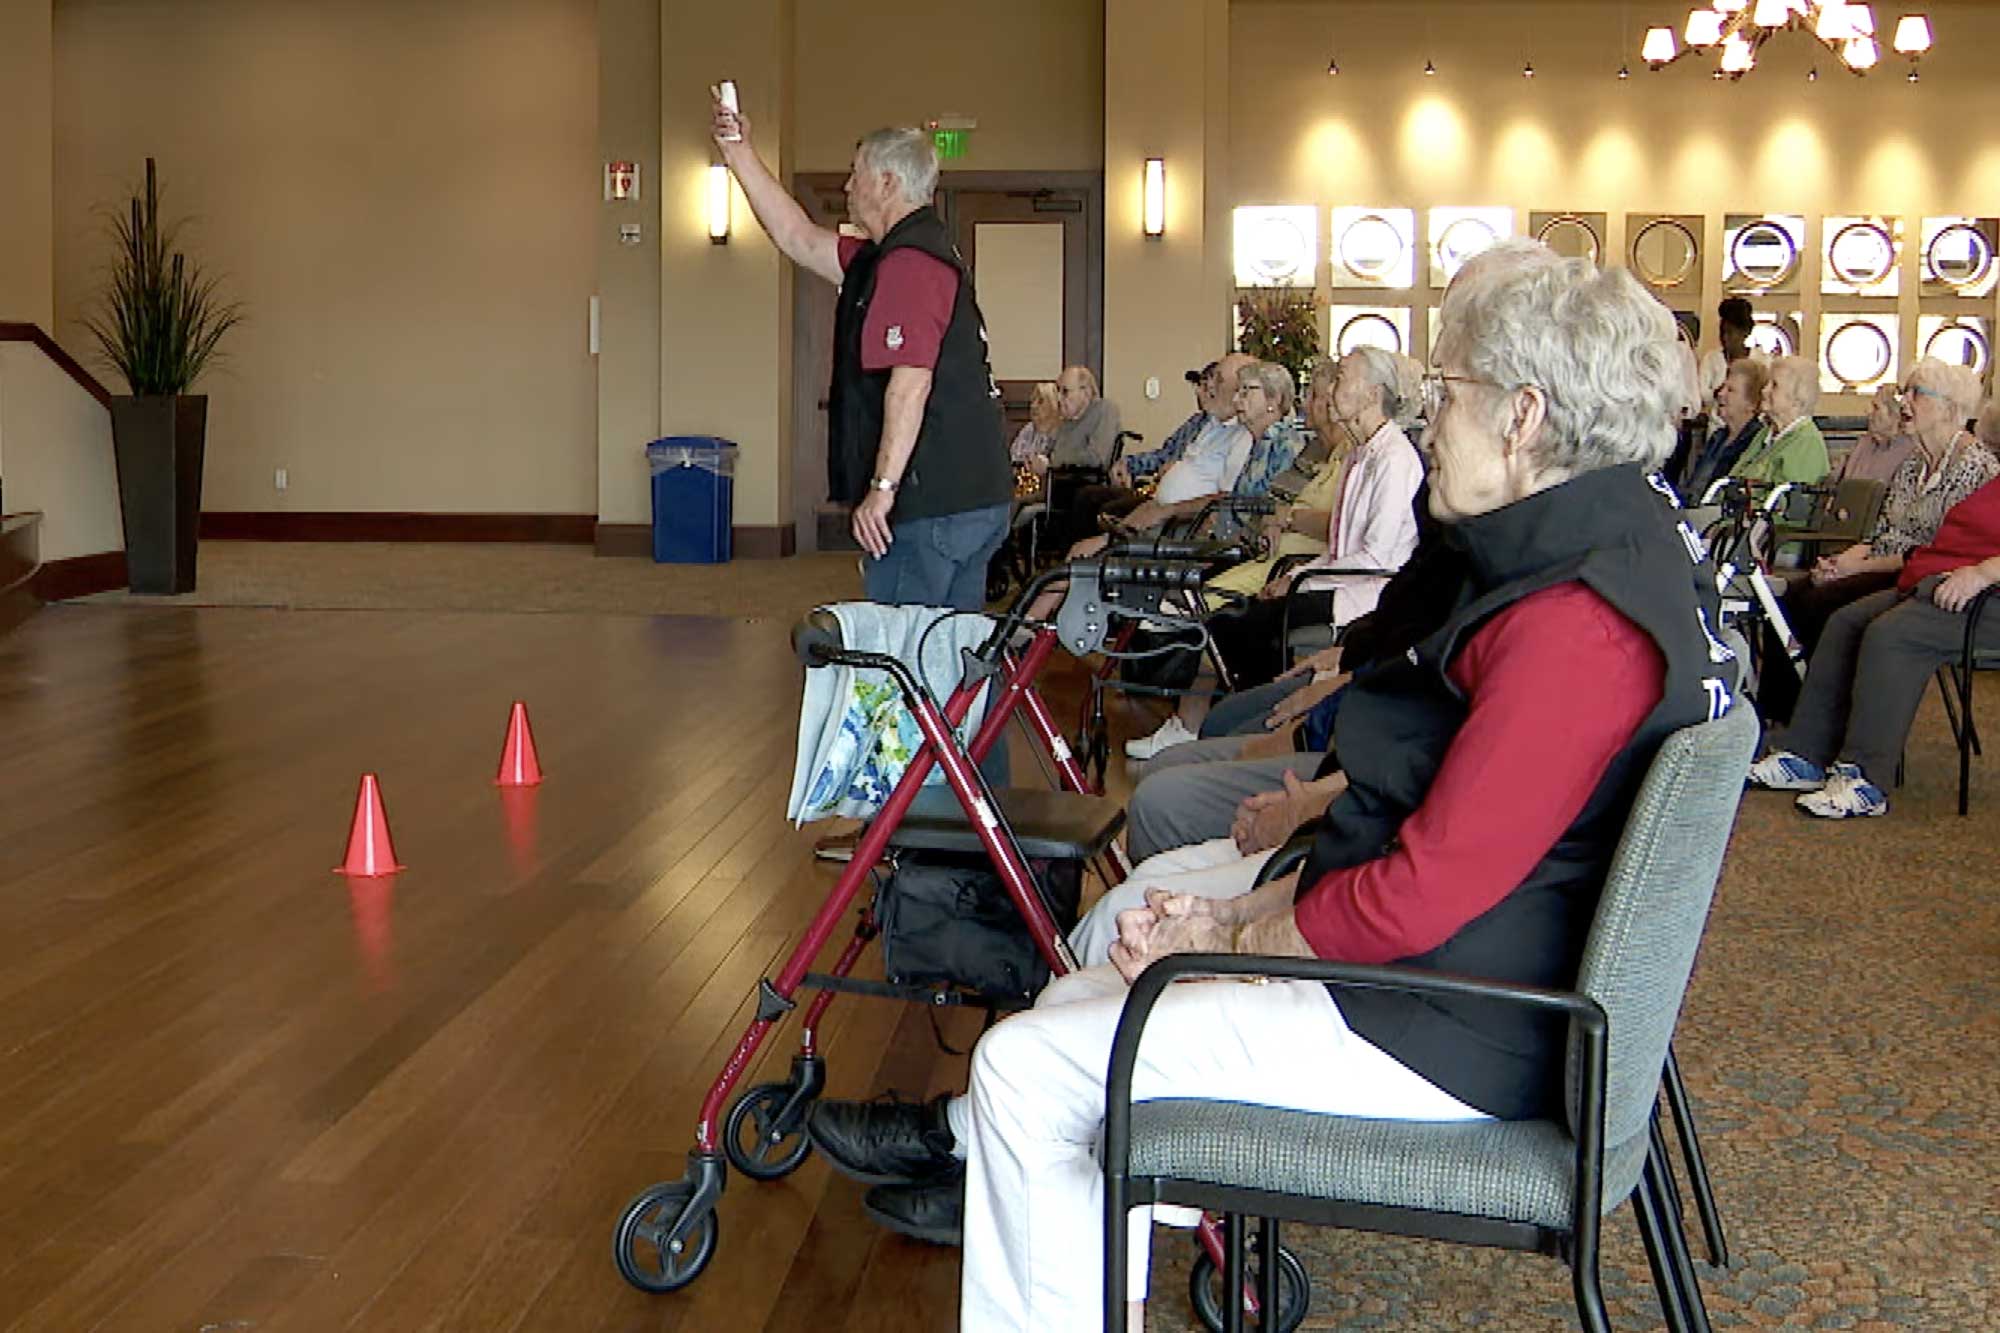 Trillium Woods in the News: Wii Bowling Tournament for the Ages!